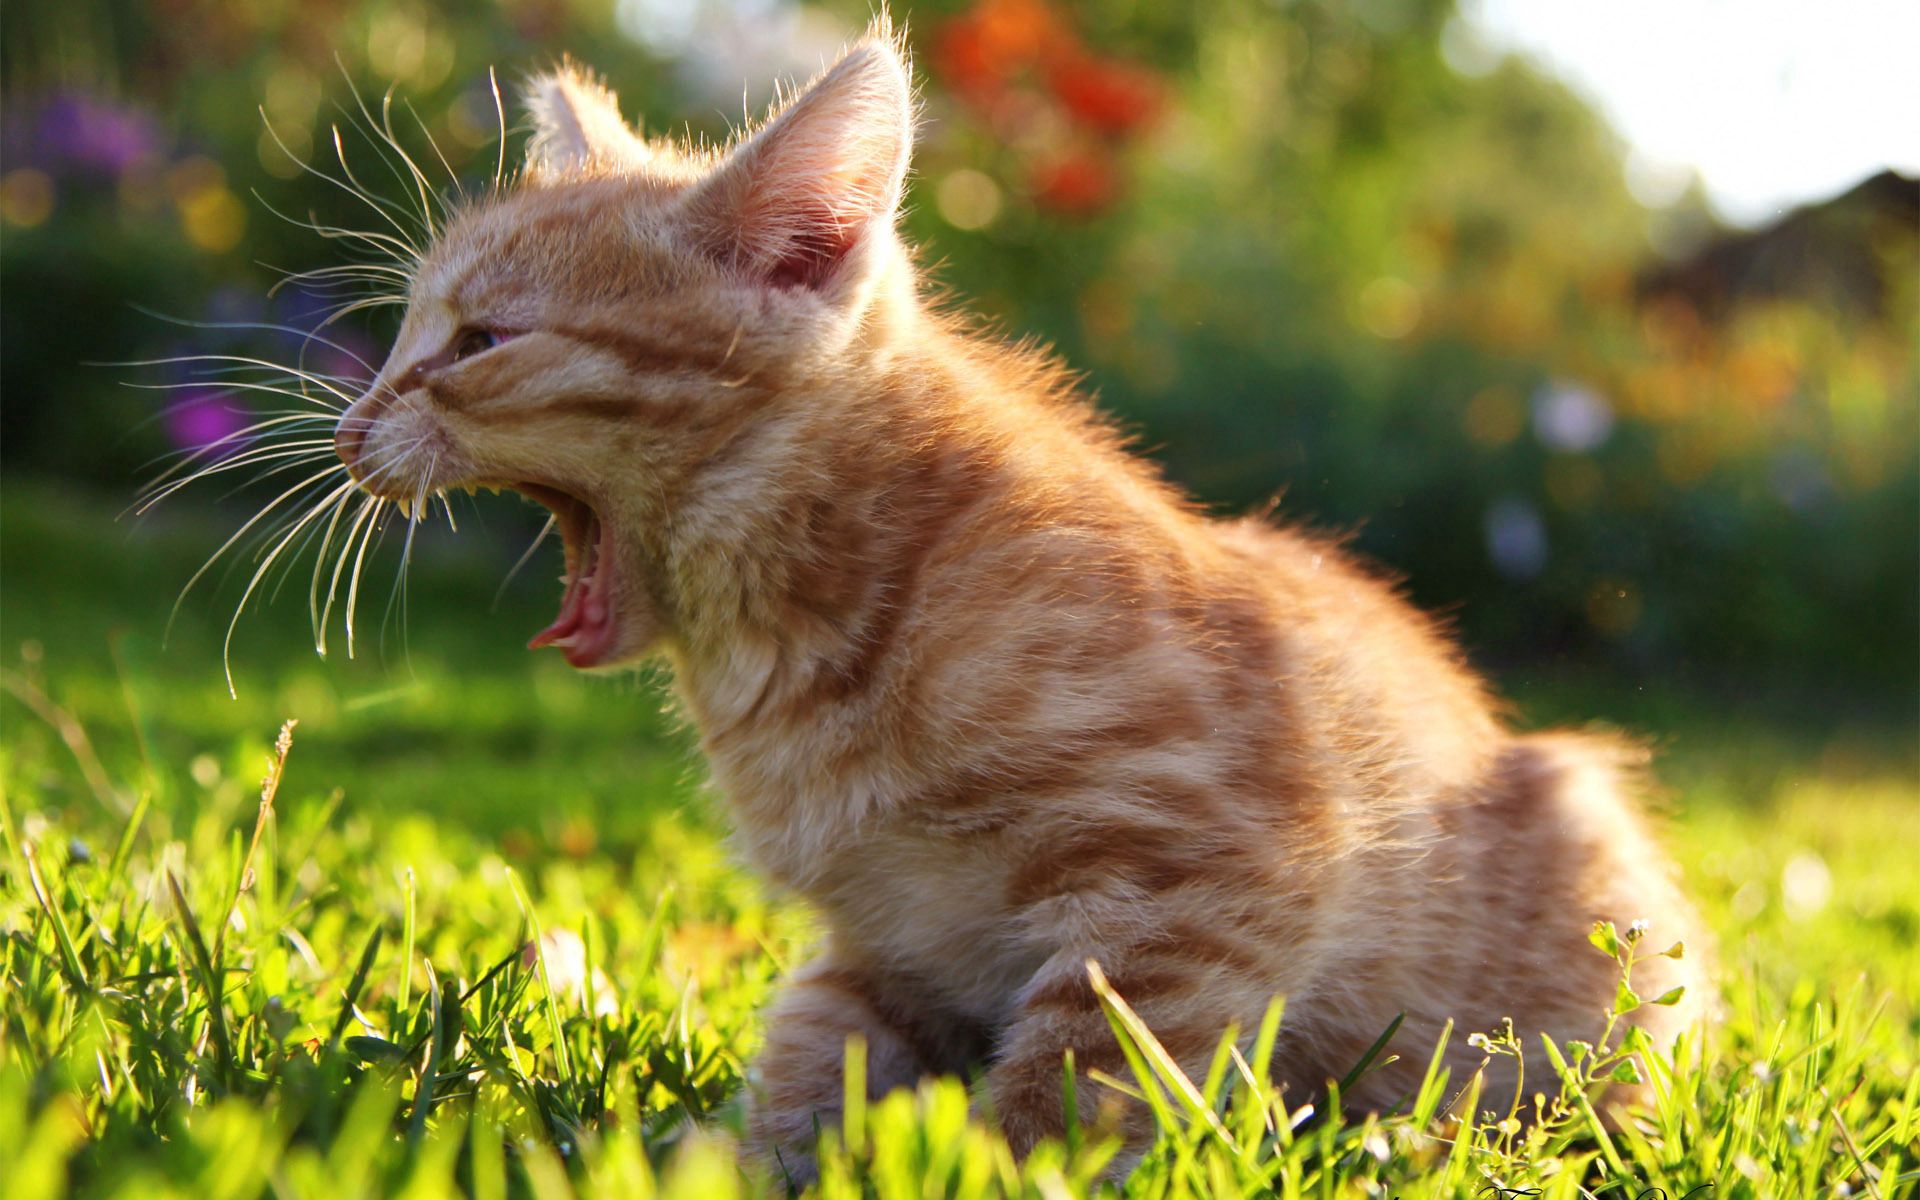 61643 3840x2160 PC pictures for free, download cry, kitty, animals, kitten 3840x2160 wallpapers on your desktop